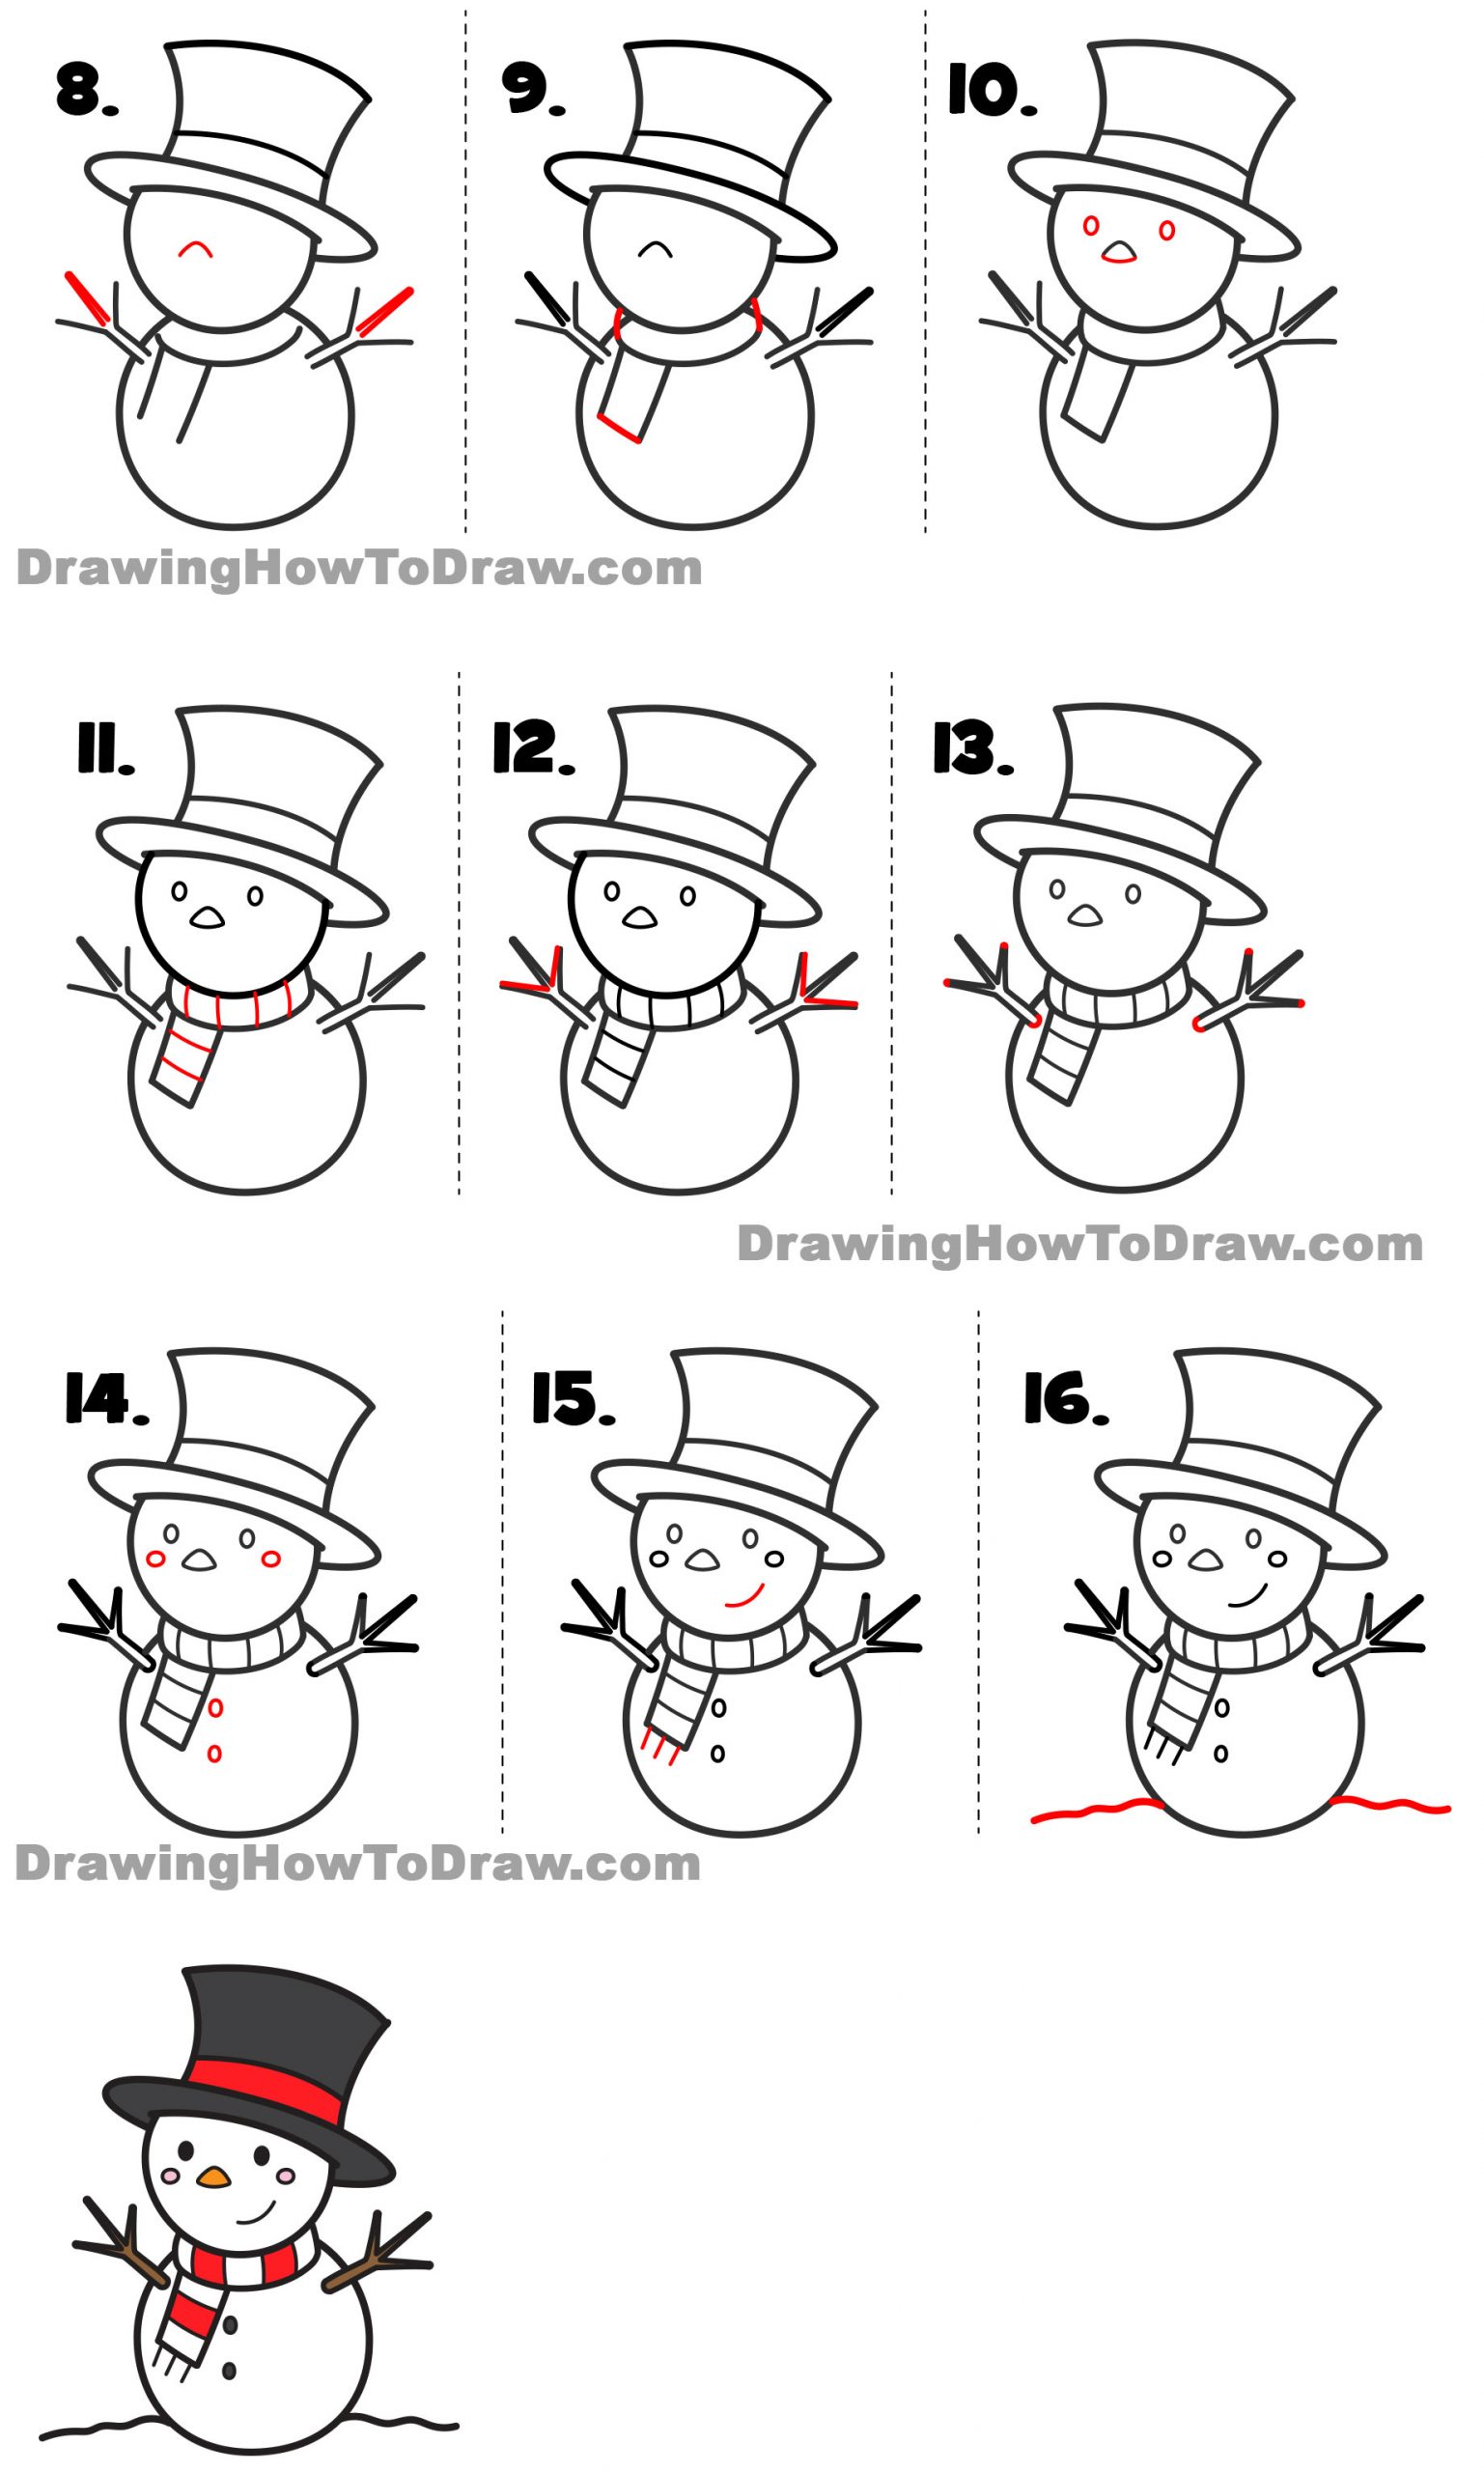 Learn How to Draw a Cute Cartoon Snowman for Kids and Beginners step by step drawing tutorial